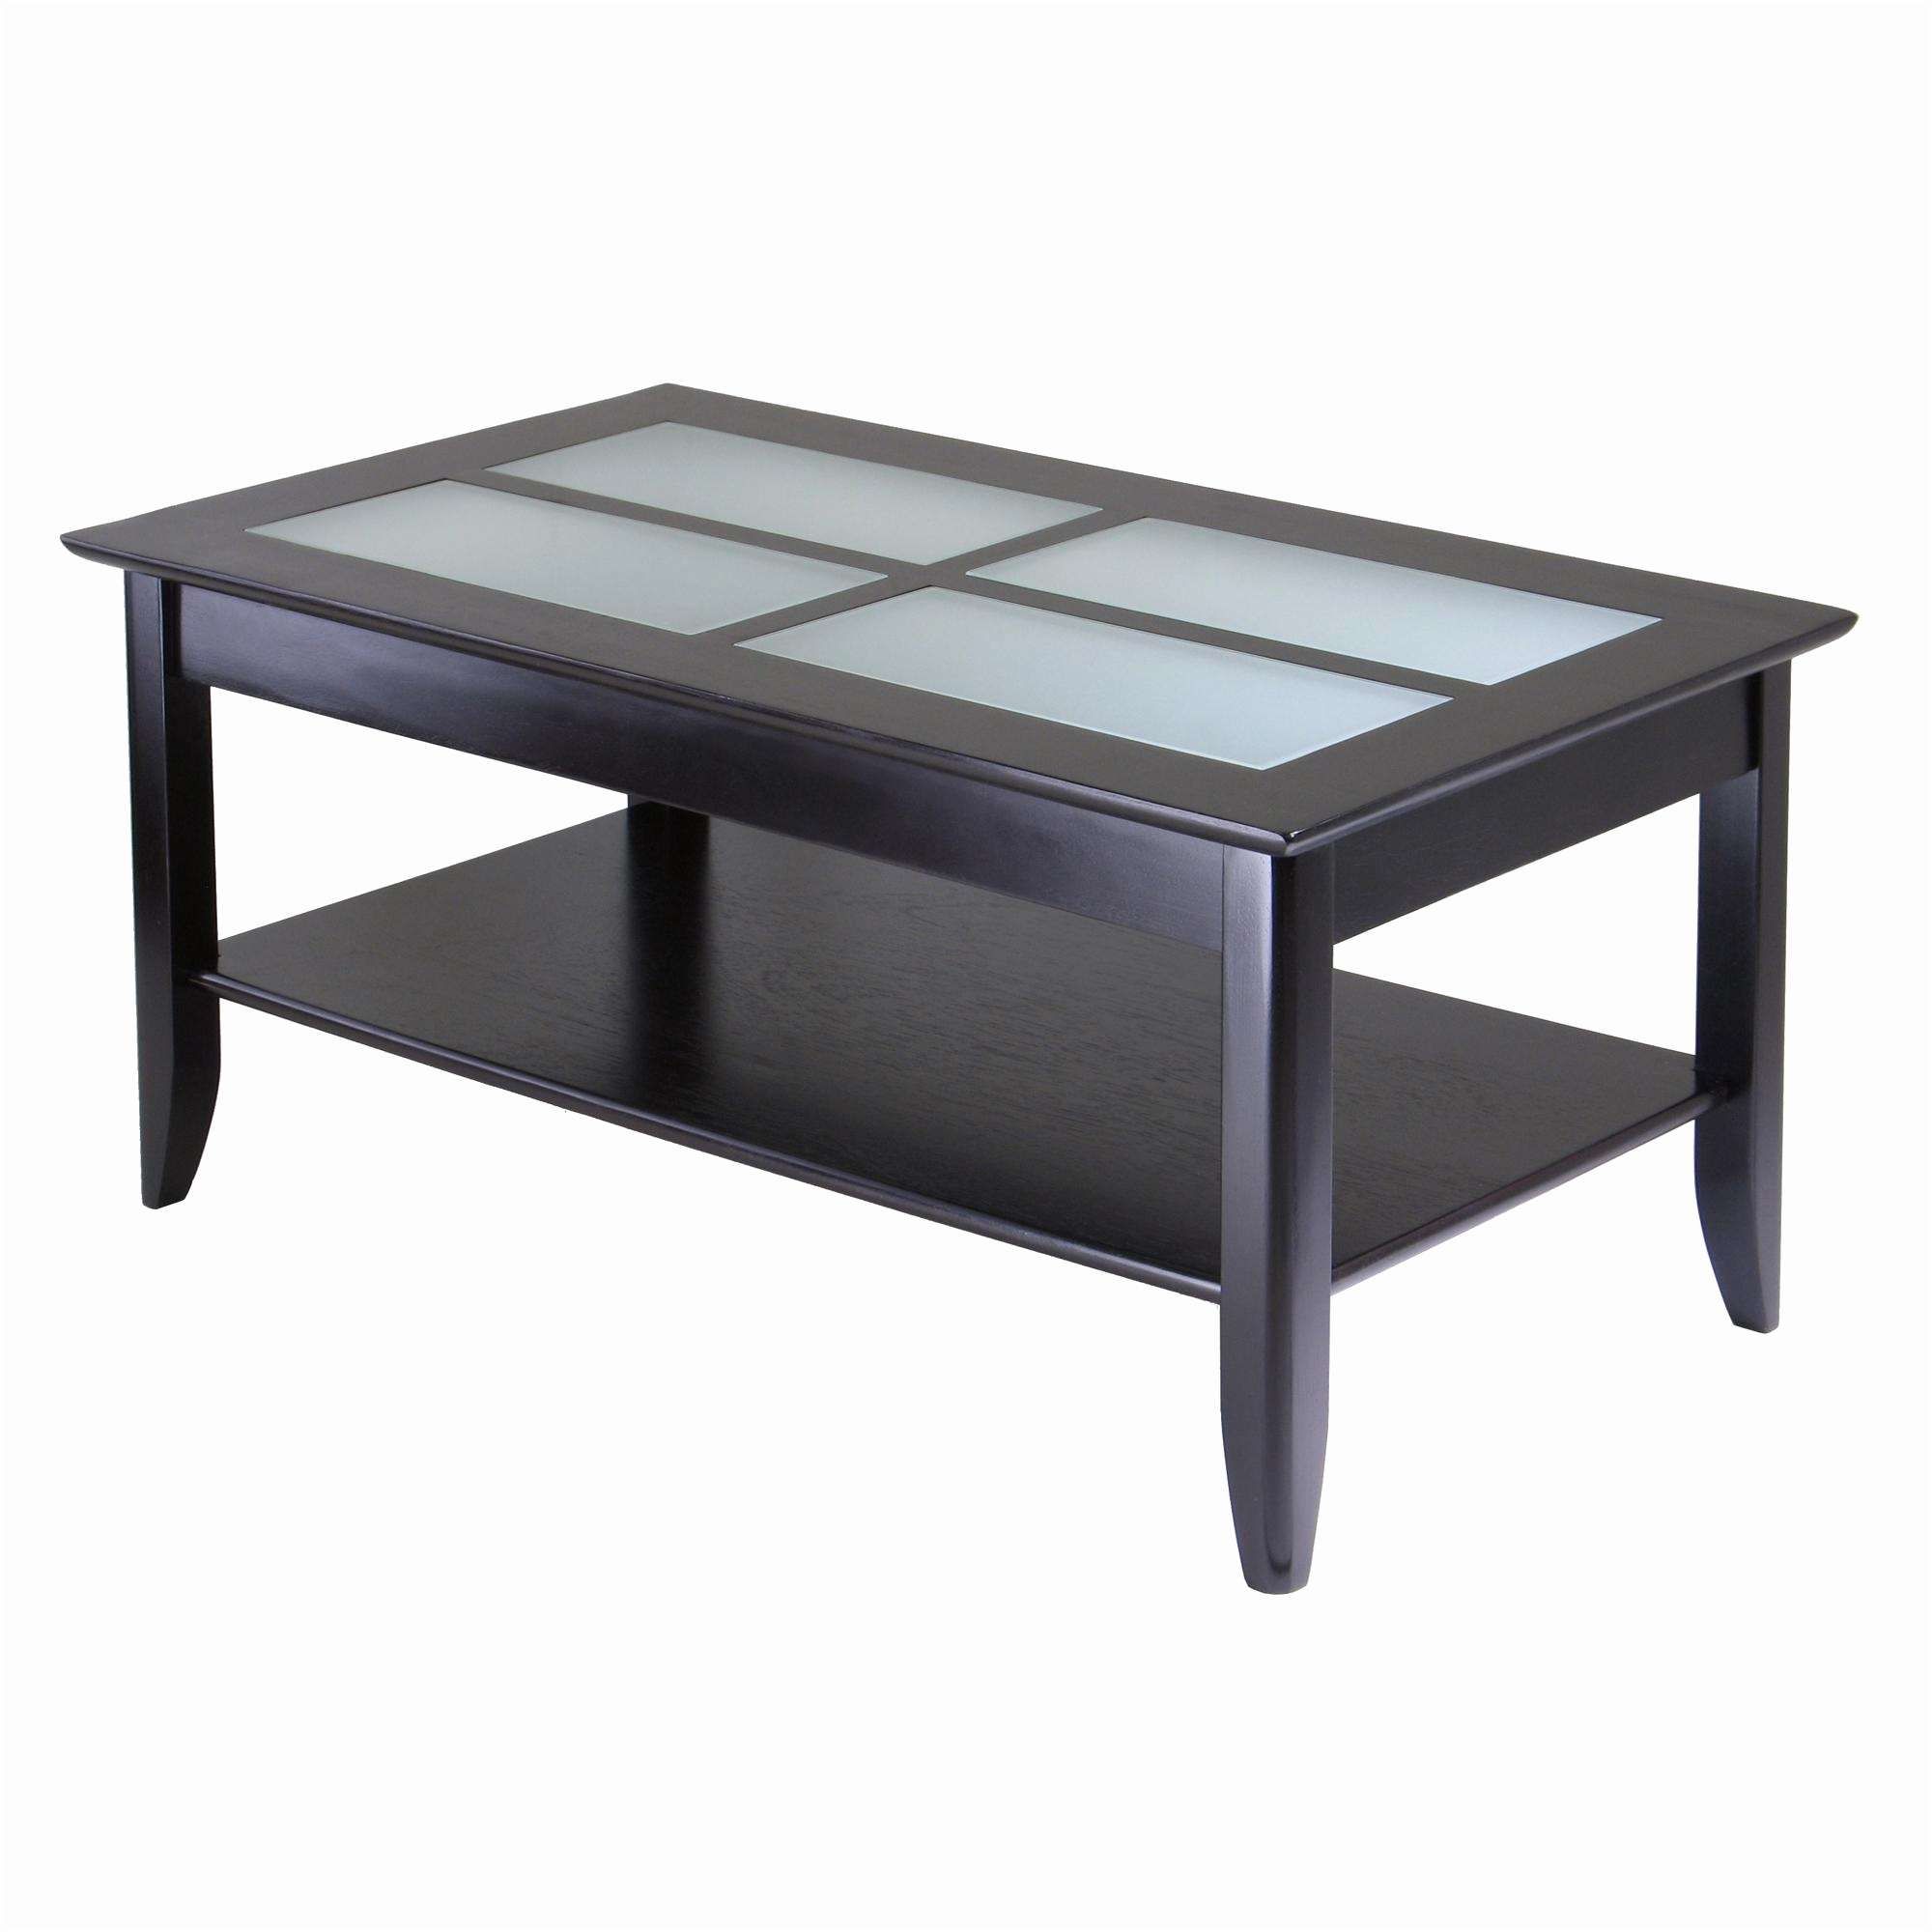 Trendy Black Wood And Glass Coffee Tables Within Coffee Tables : Frosted Glass Coffee Table Unique Winsome Wood (Gallery 12 of 20)